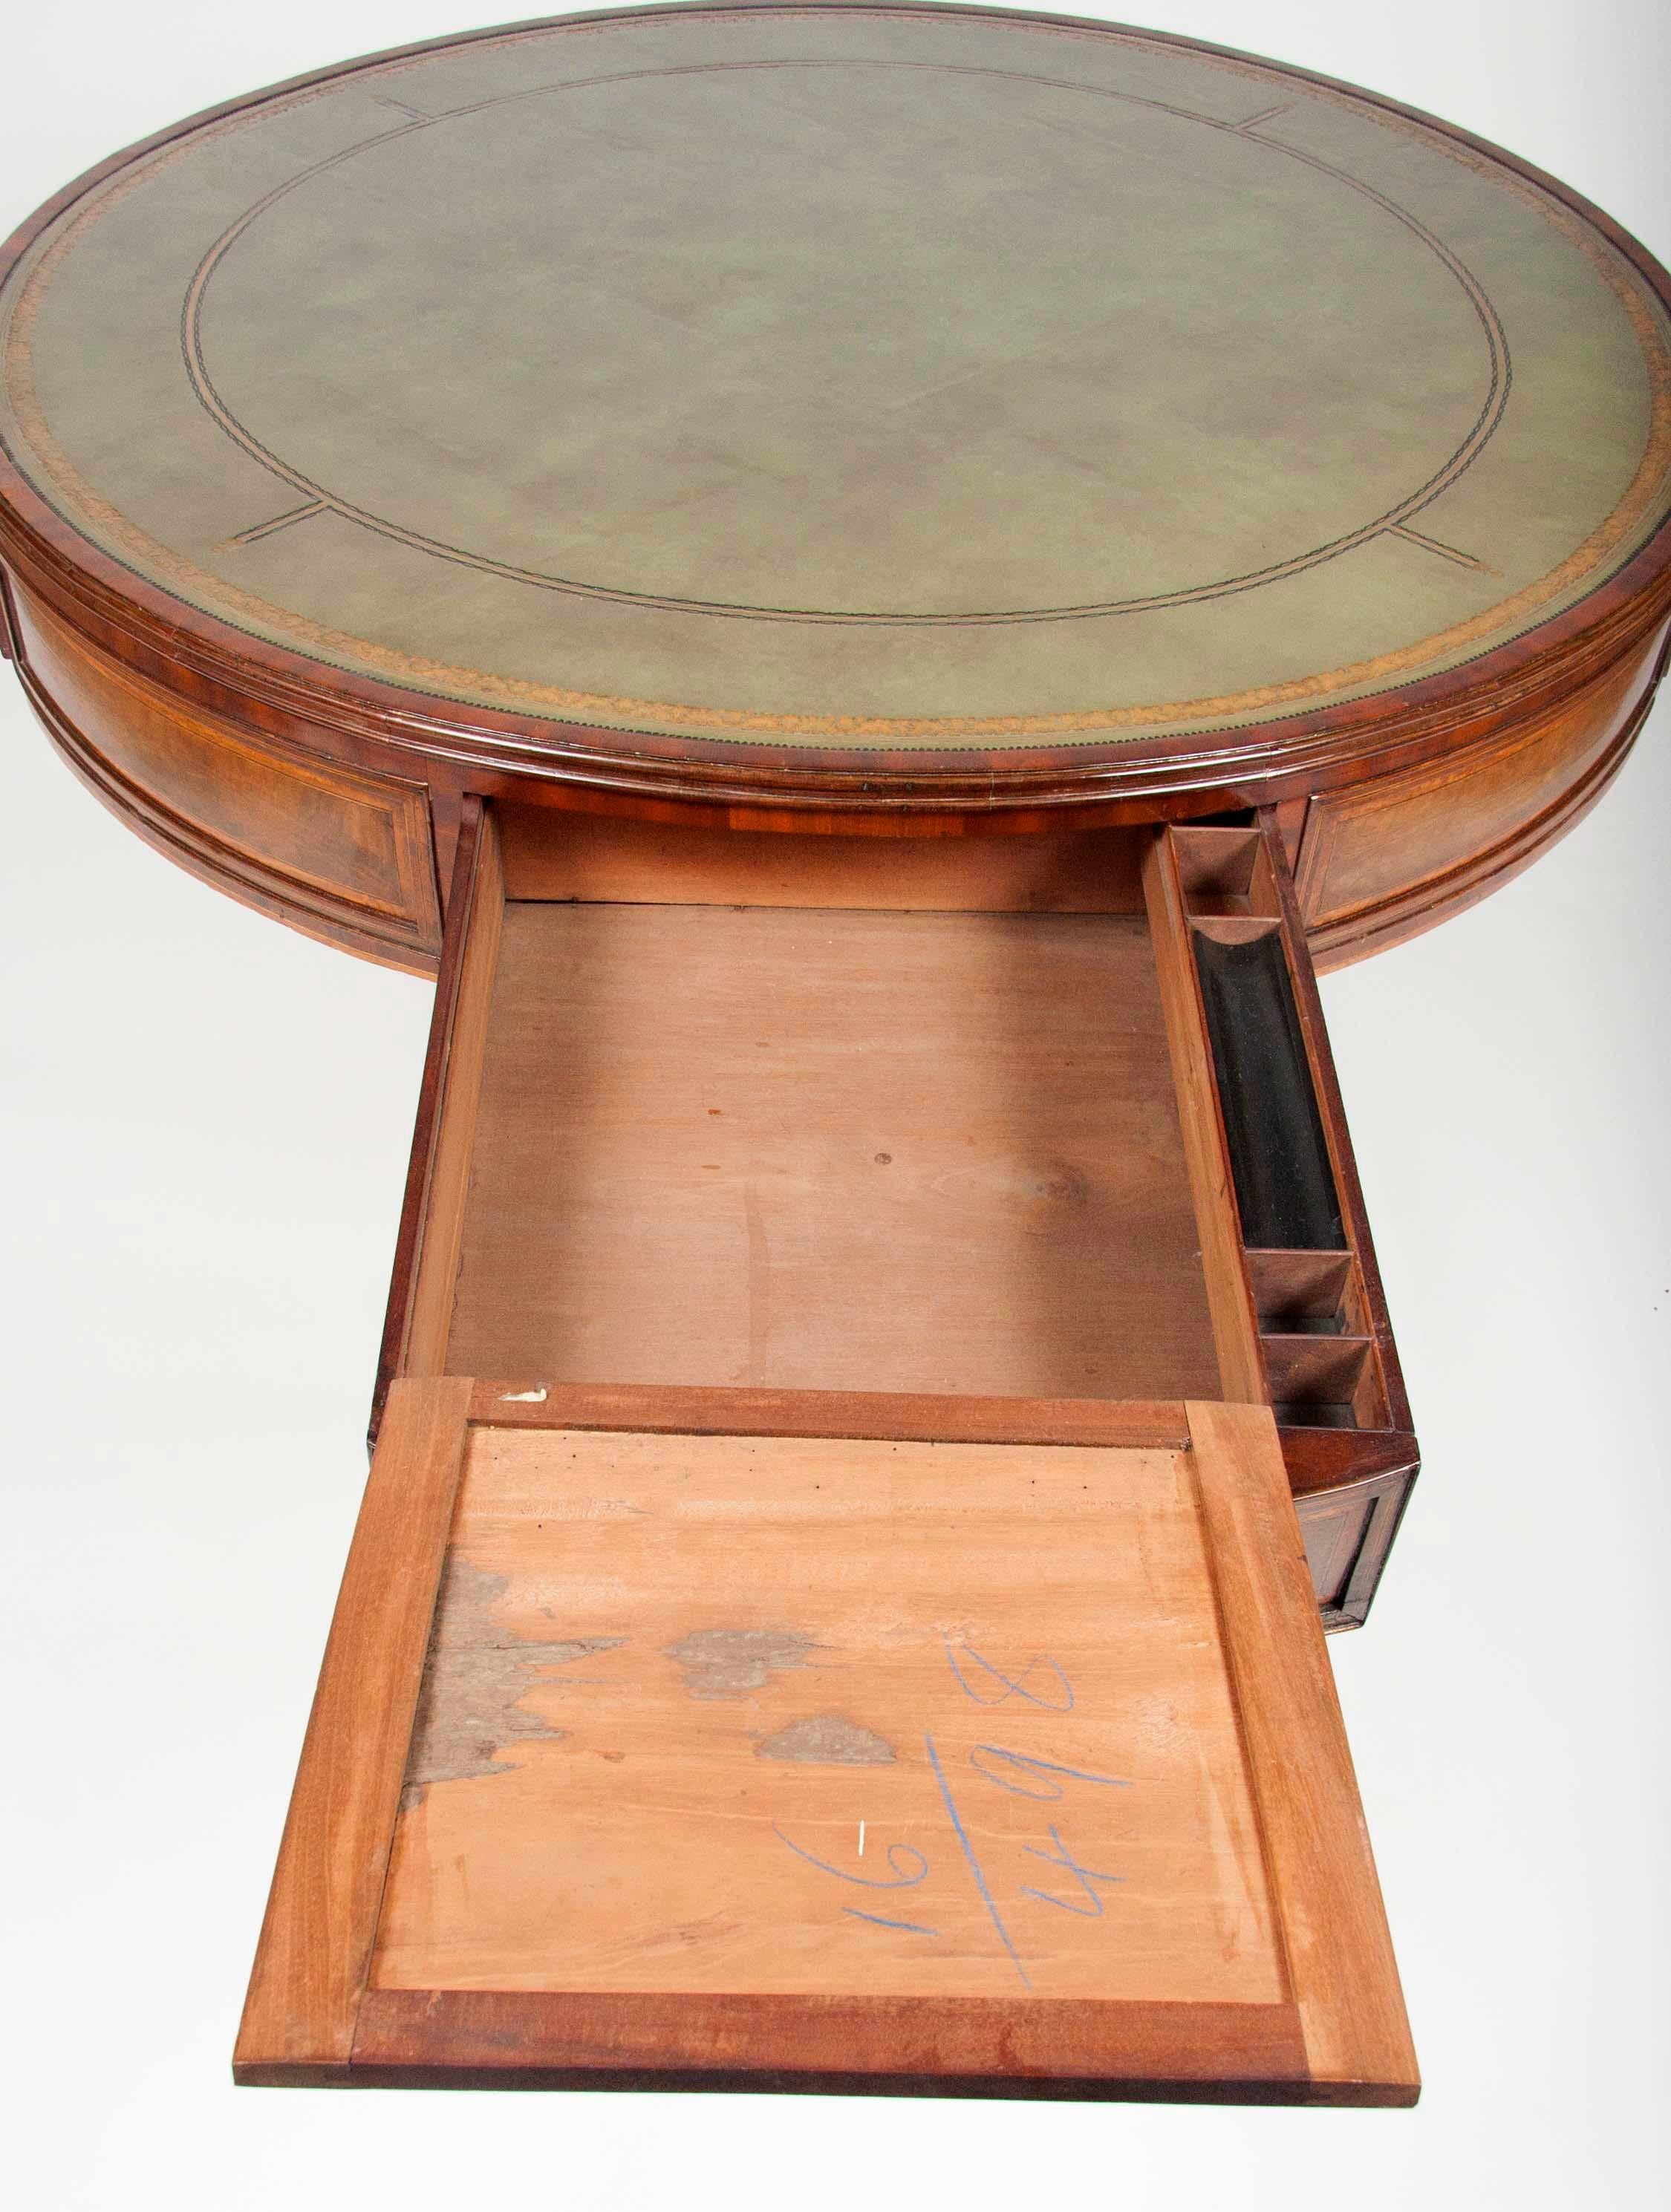 Early 19th Century Regency Mahogany and Inlaid Drum Table